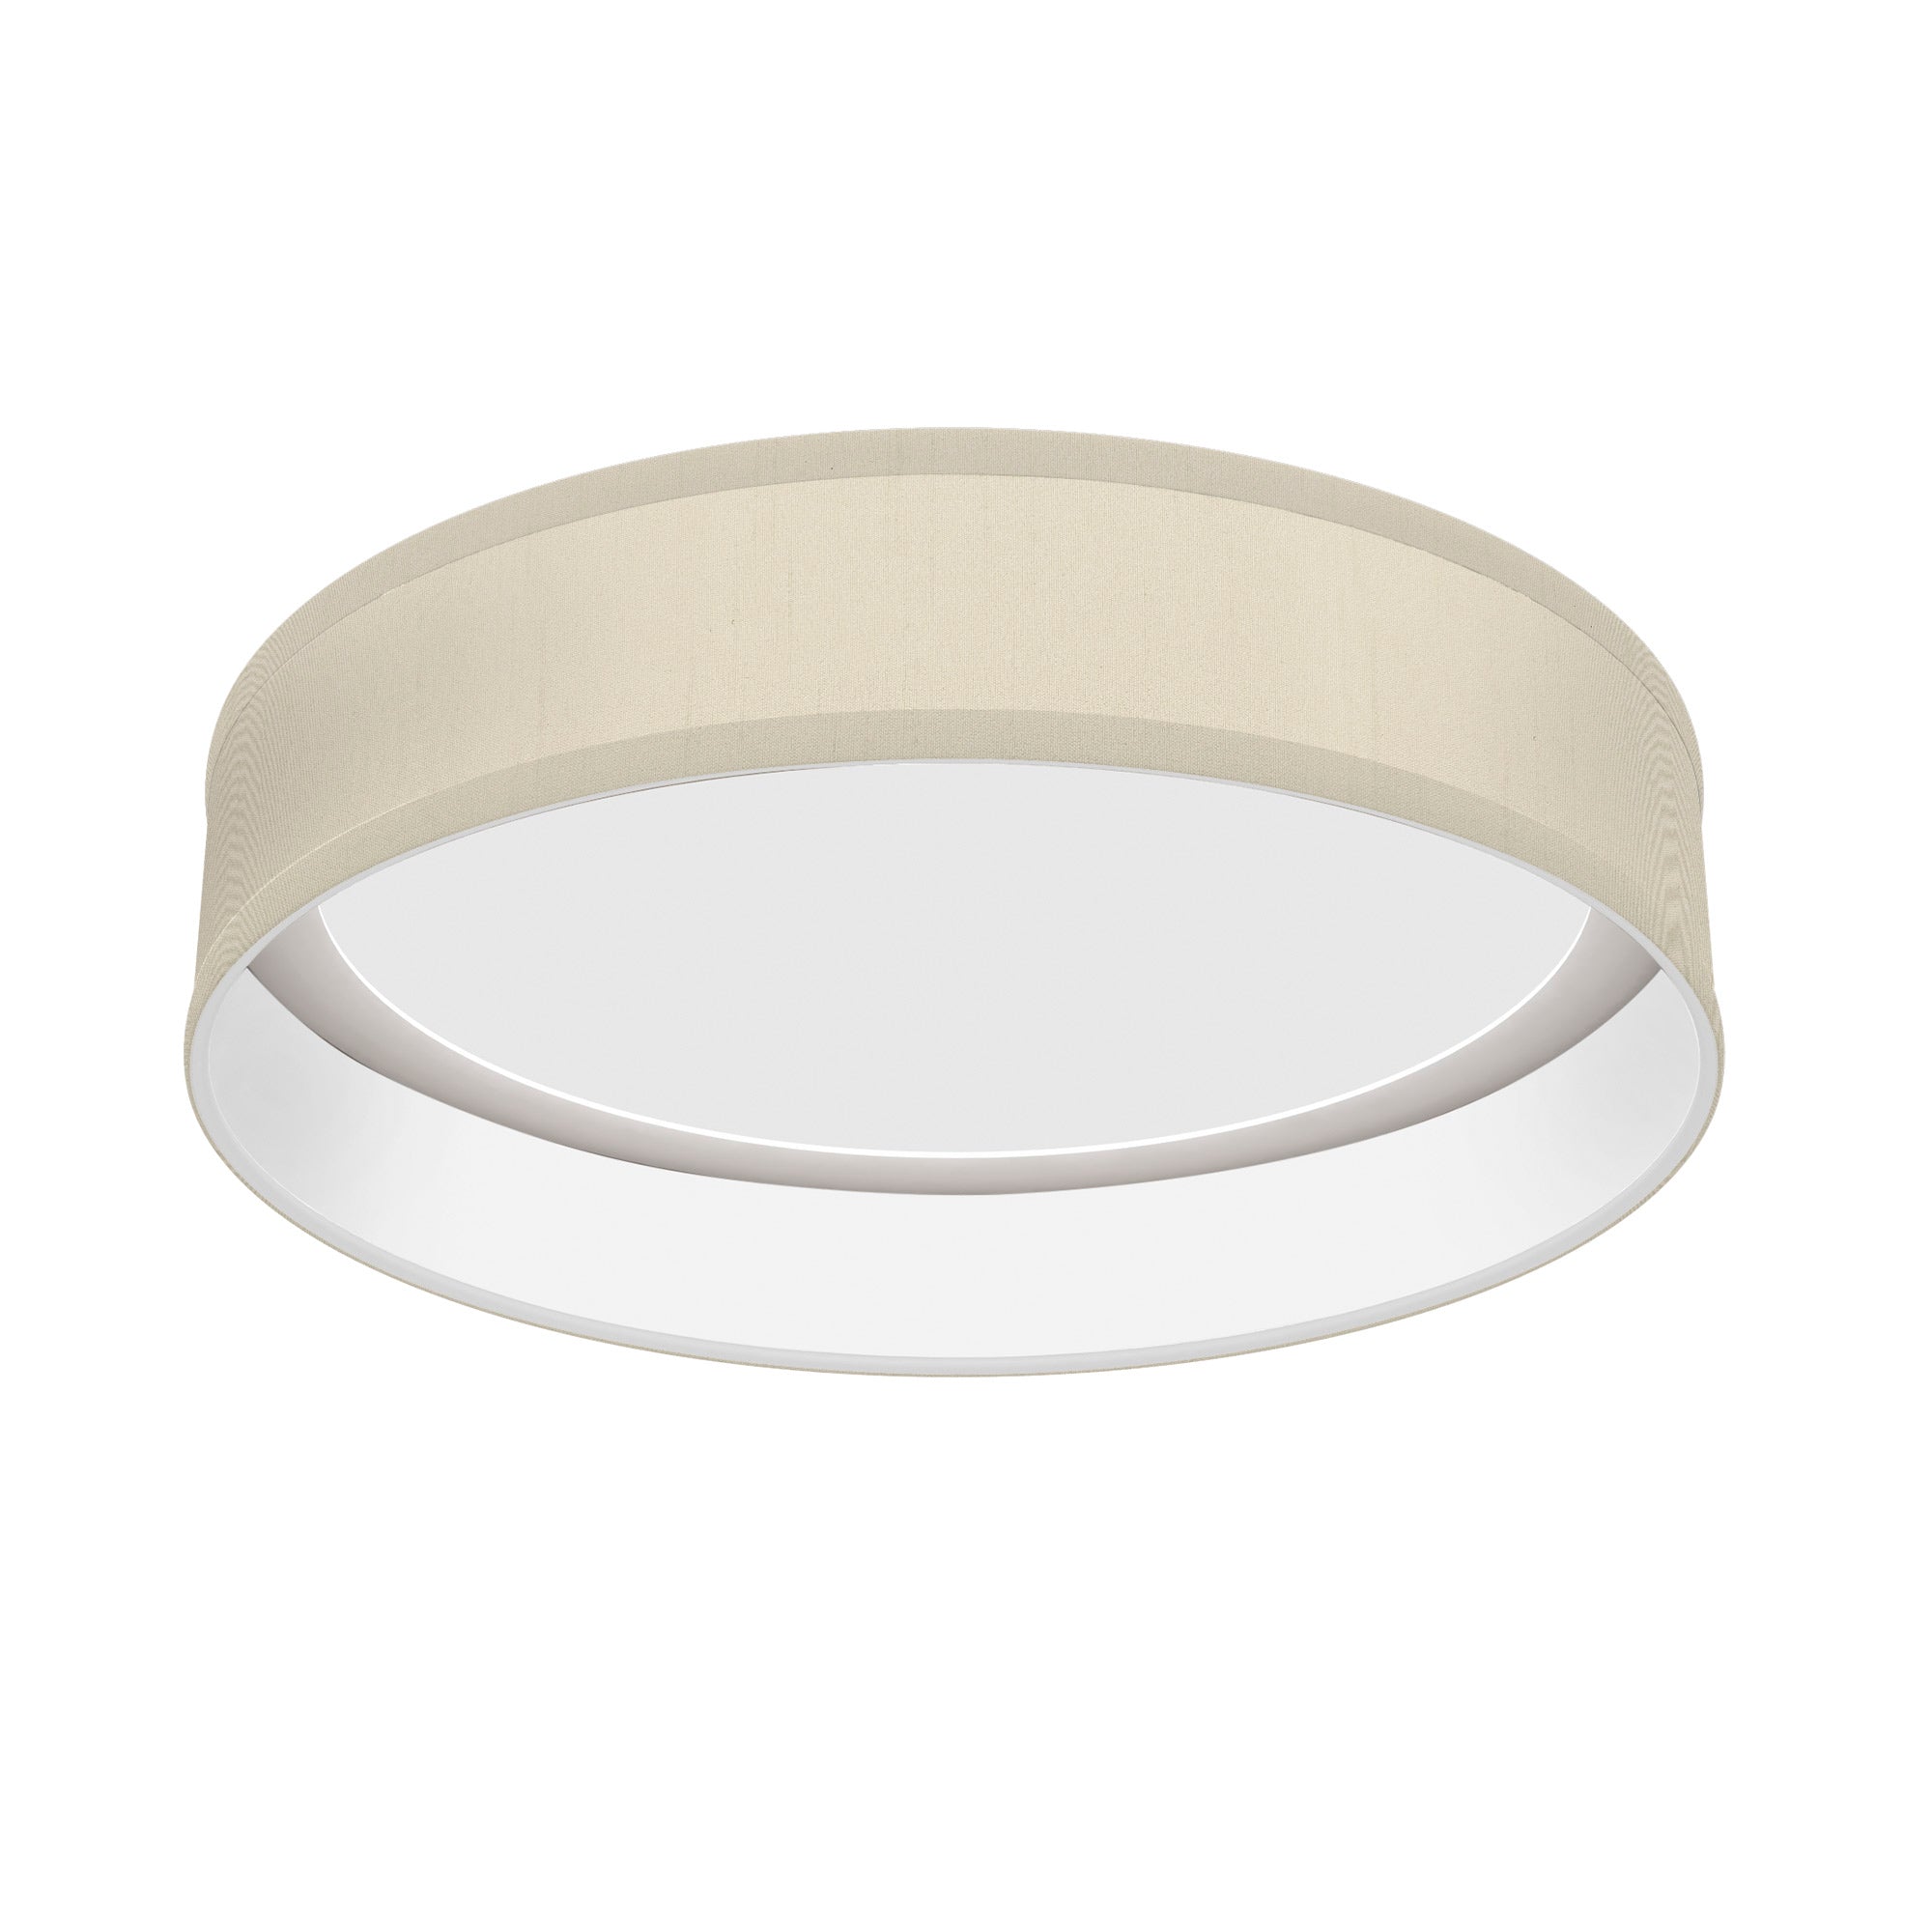 The Vince Flush Mount from Seascape Fixtures with a silk shade in cream color.